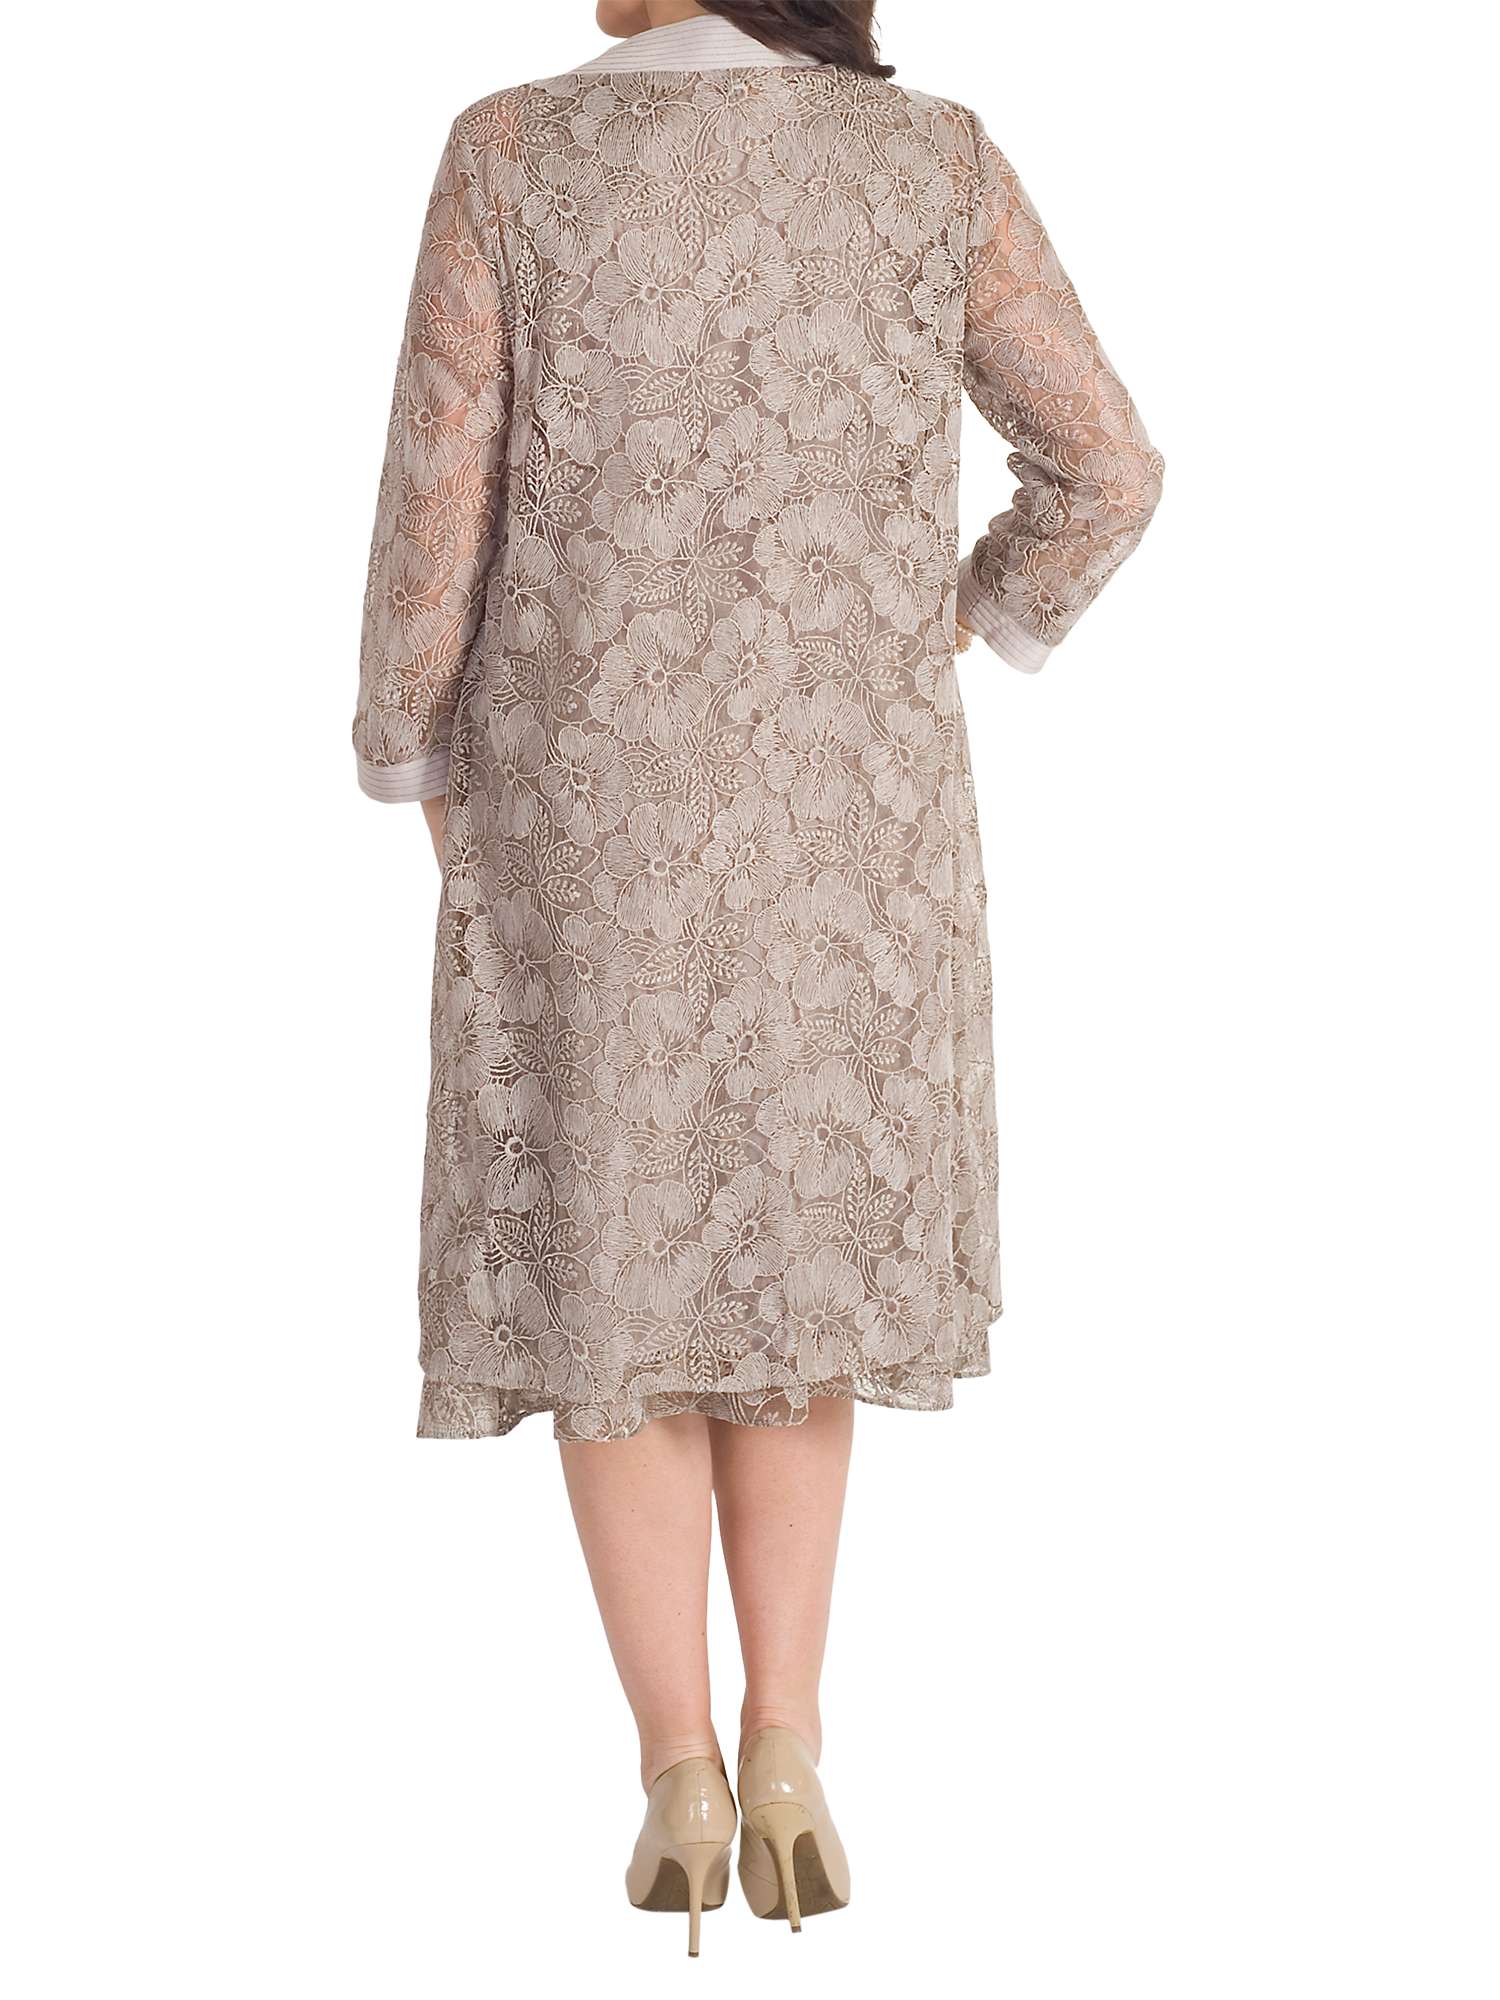 Buy Chesca Embroidered Lace Coat, Mink Online at johnlewis.com